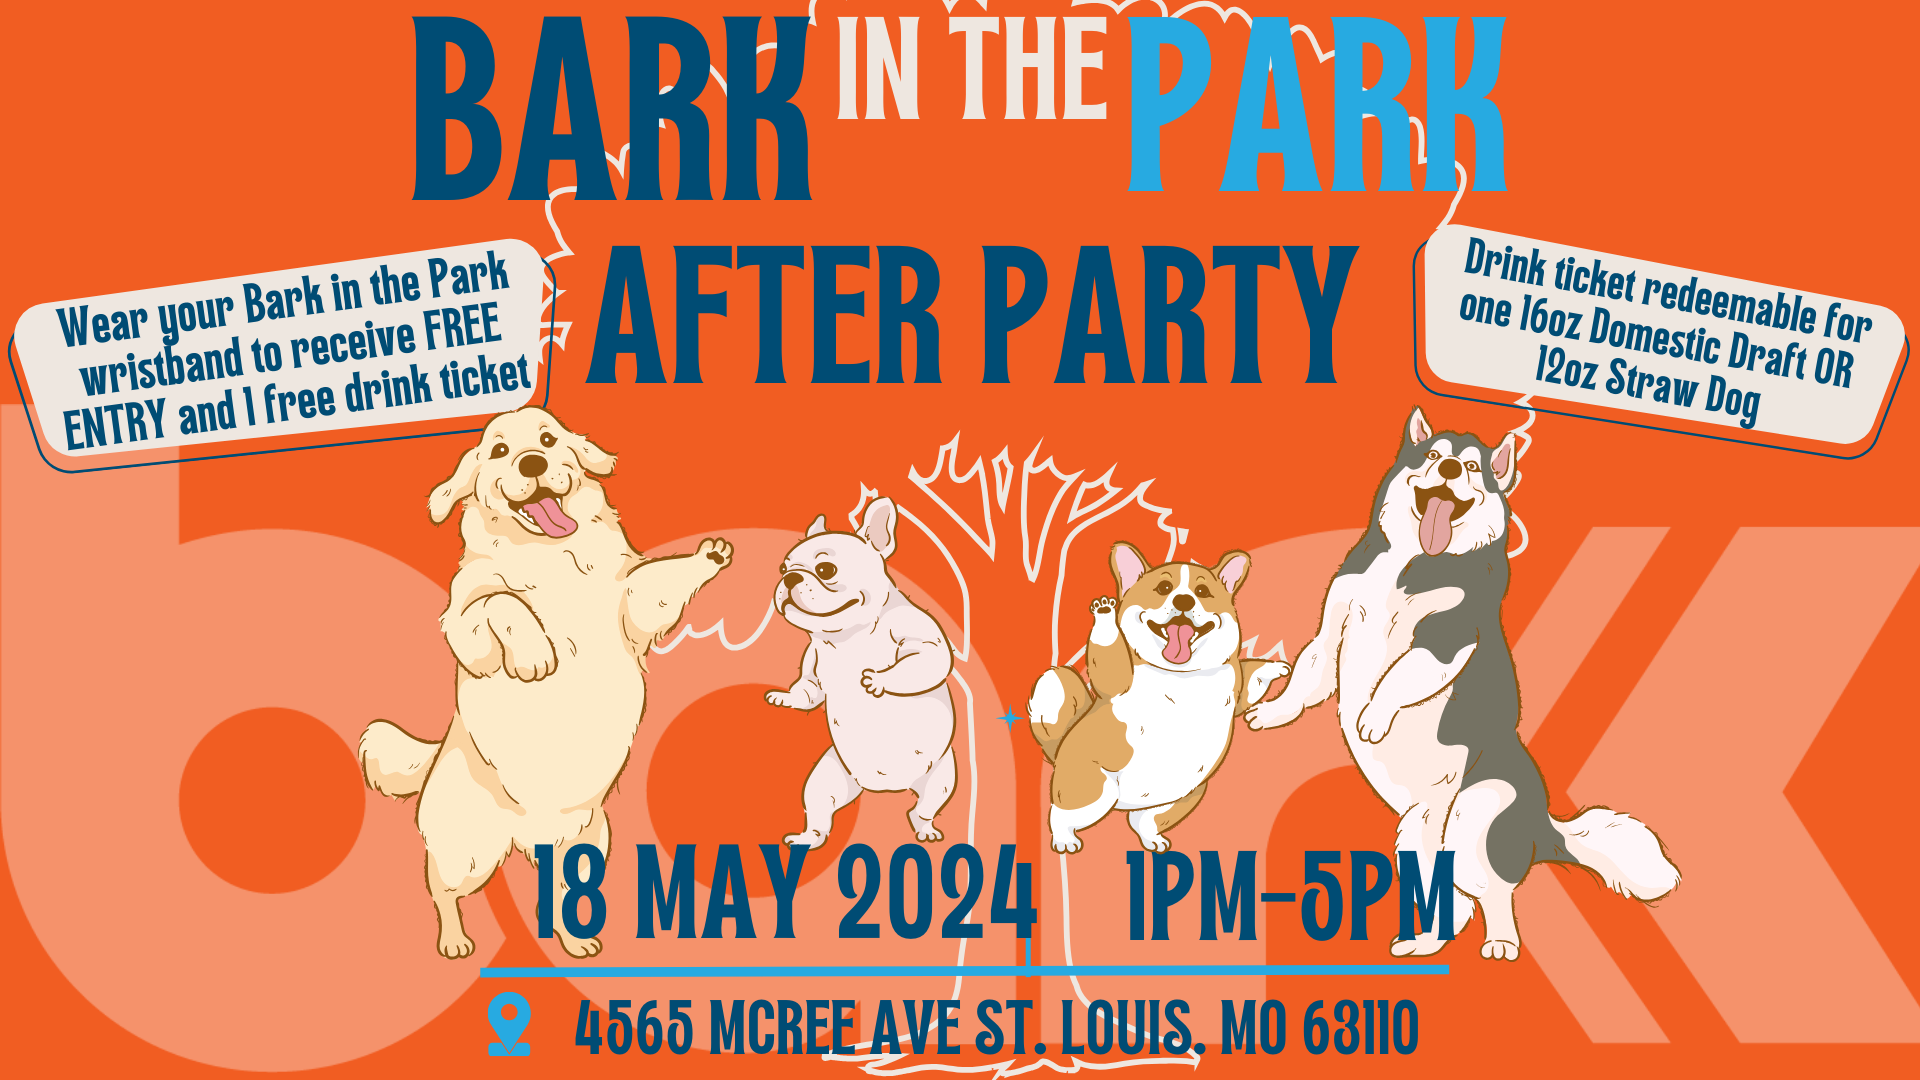 Bark in the park after party. Wear your bark in the park wristband to receive free entry and 1 free drink ticket. Drink ticket redeemable for one 16oz domestic draft or 12 oz straw dog. 18 may 2024 1pm to 5 pm 4565 mcree ave st. loius mo 63110